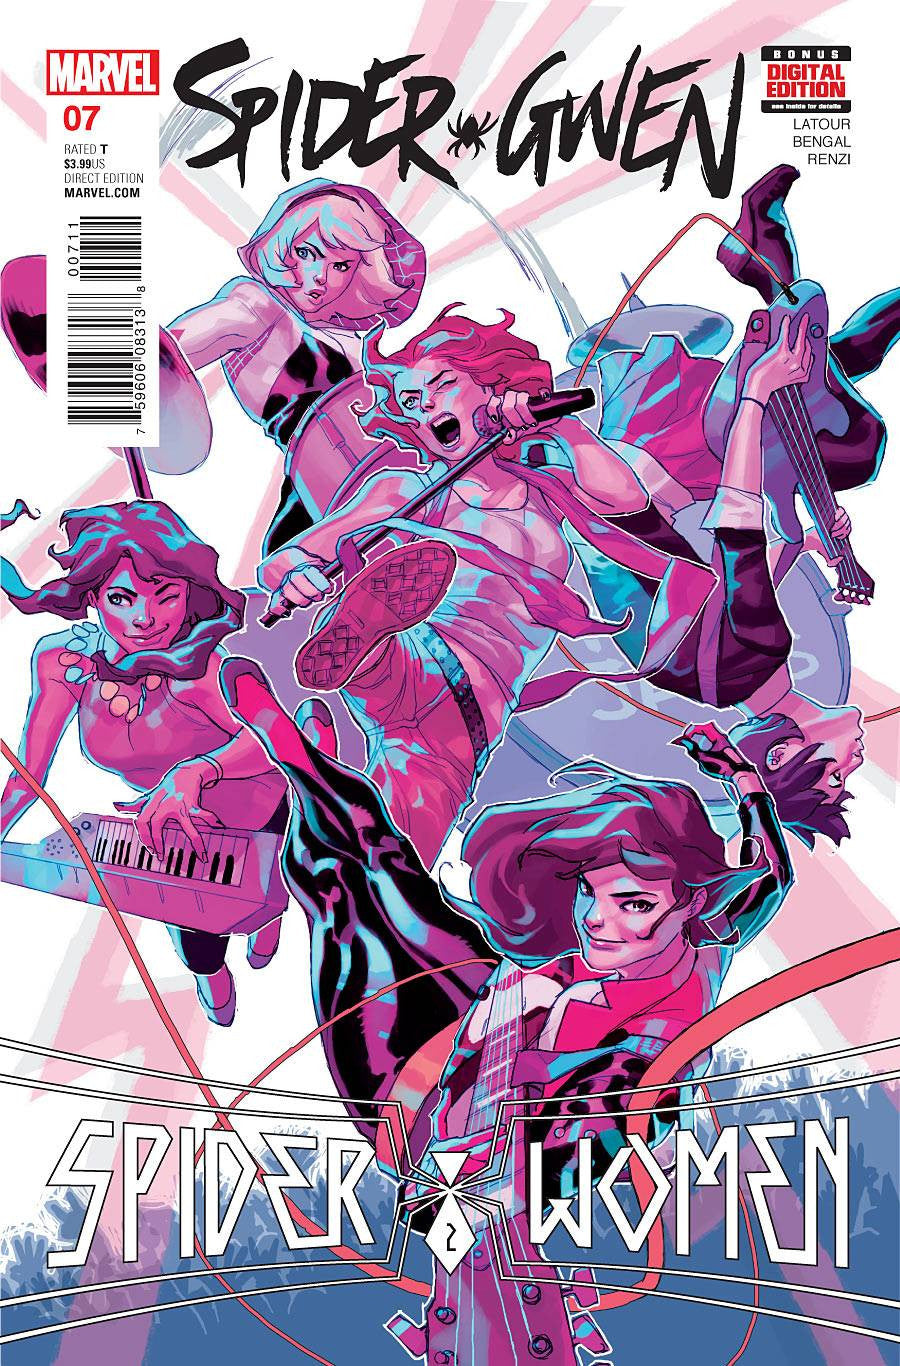 SPIDER-GWEN #7 SWO COVER